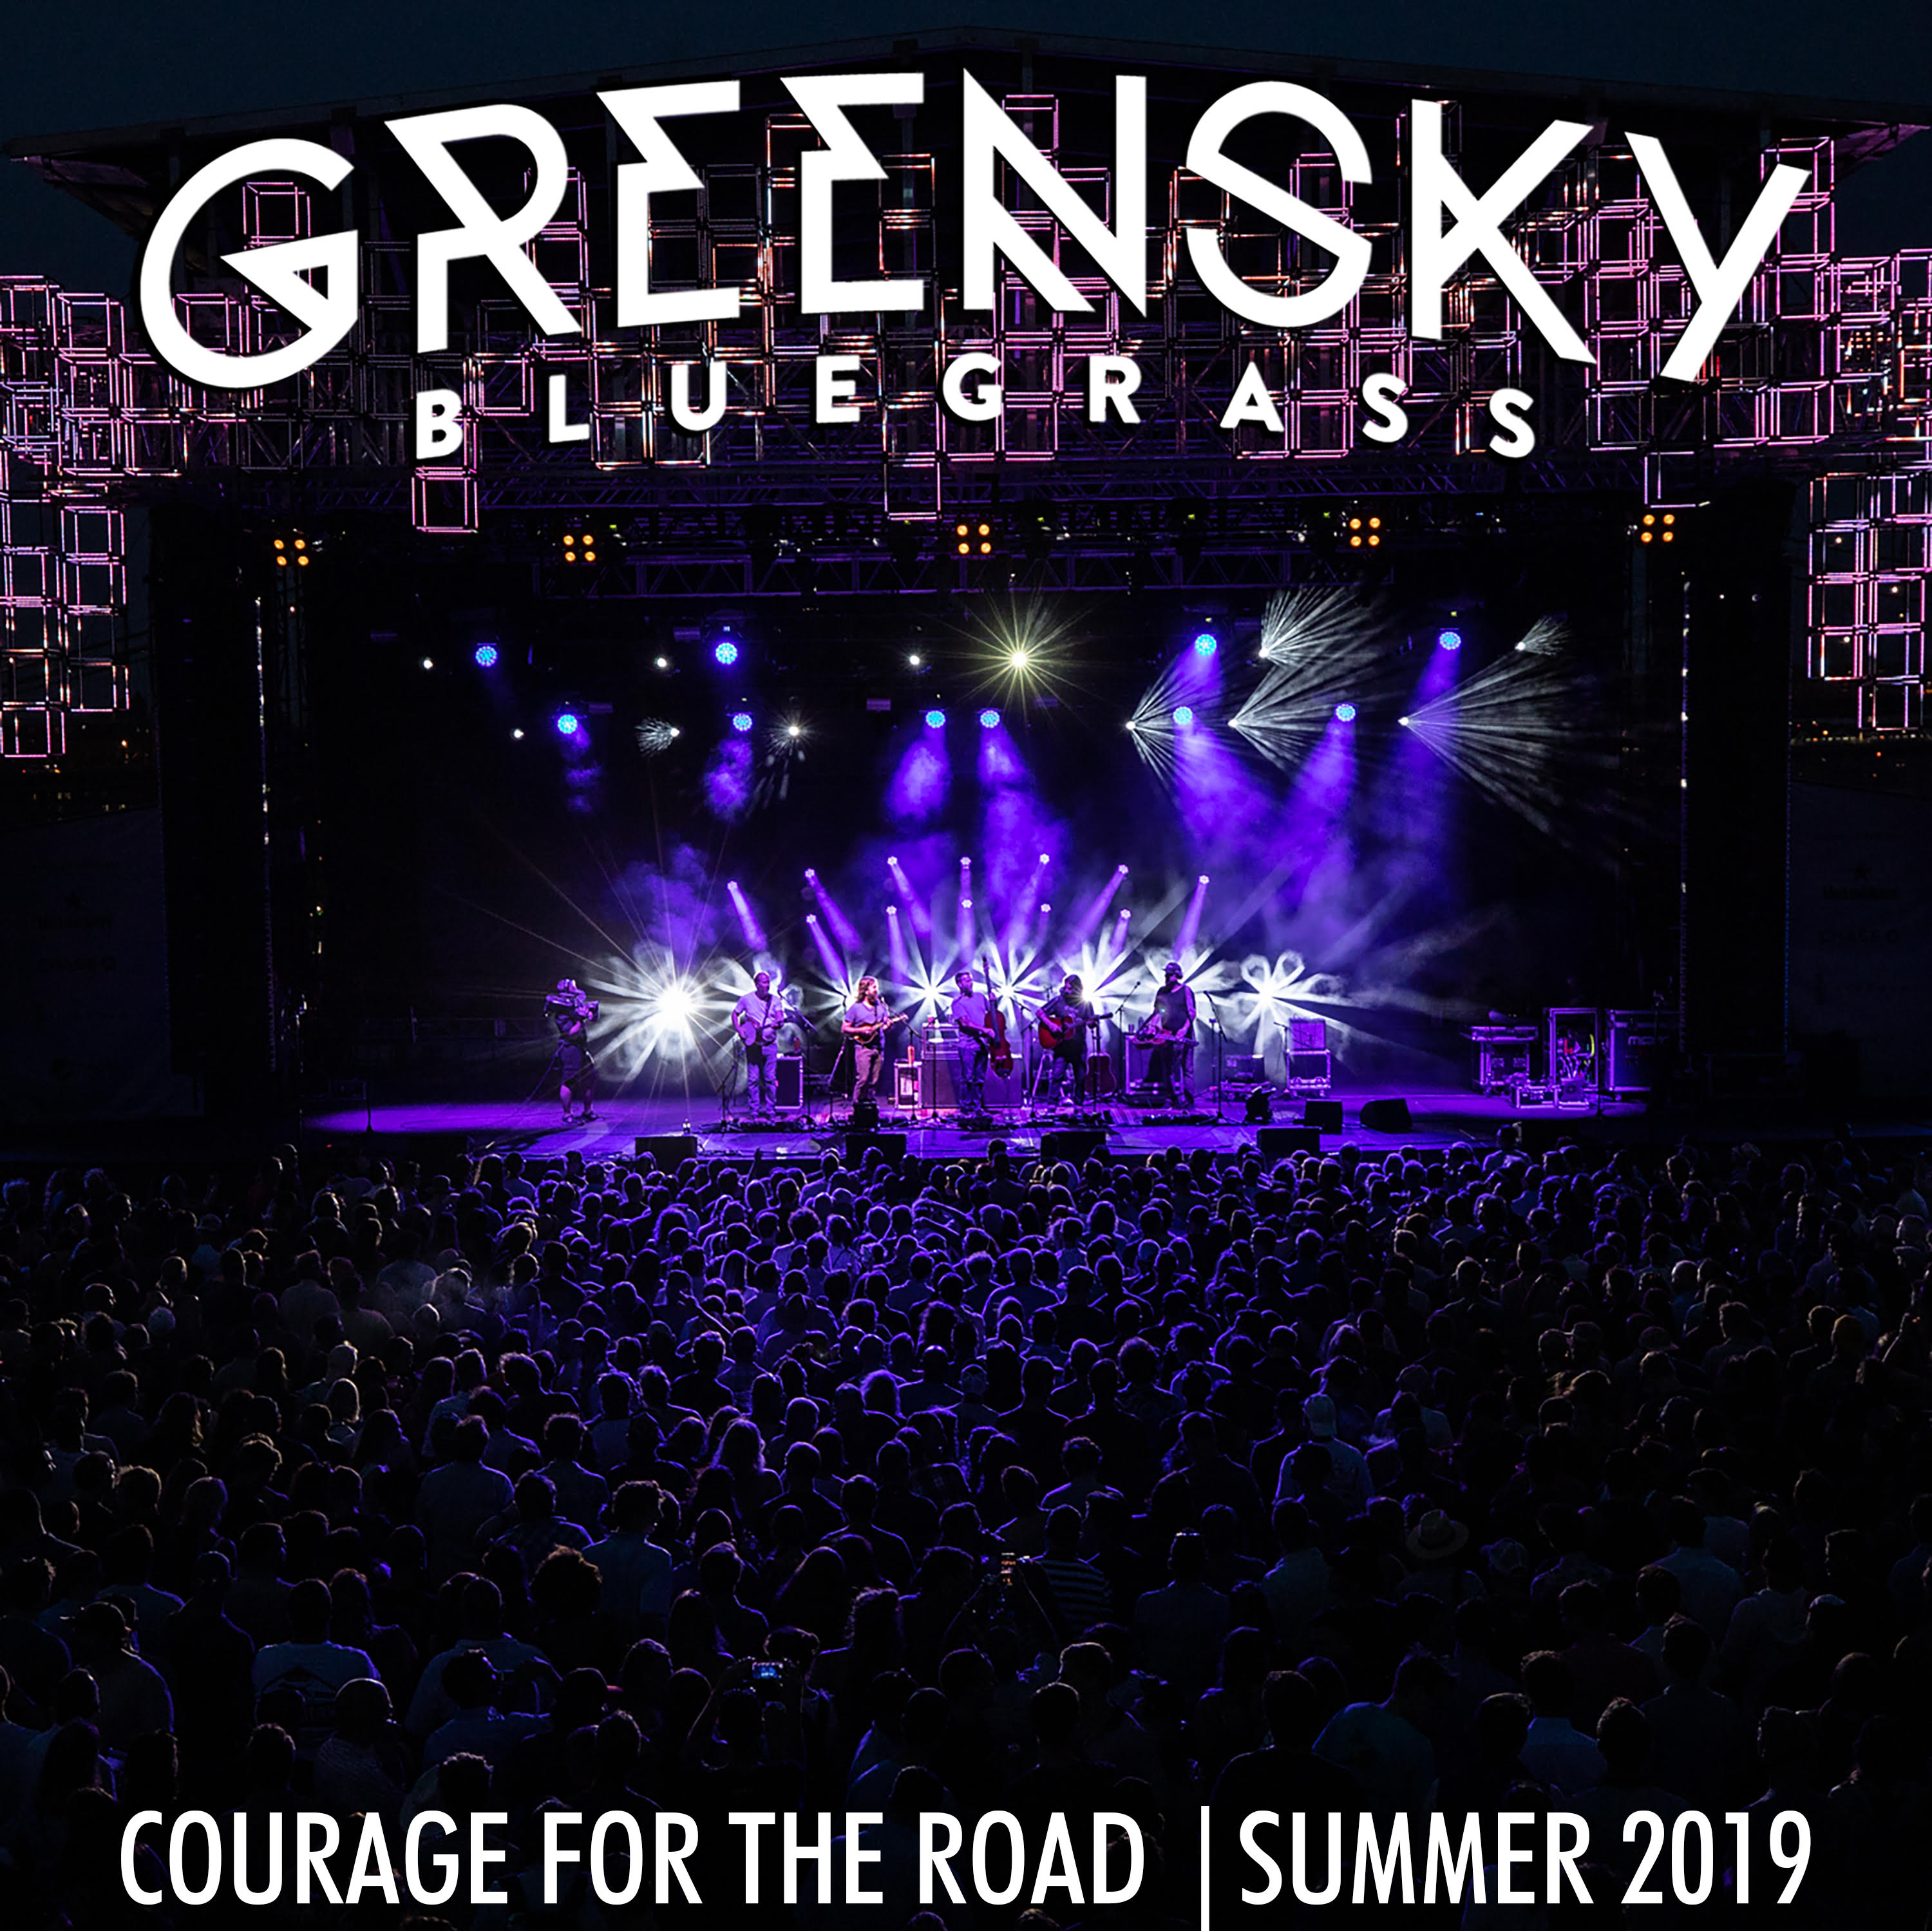 Greensky Bluegrass Offers New Live Release "Courage For The Road: Summer 2019”